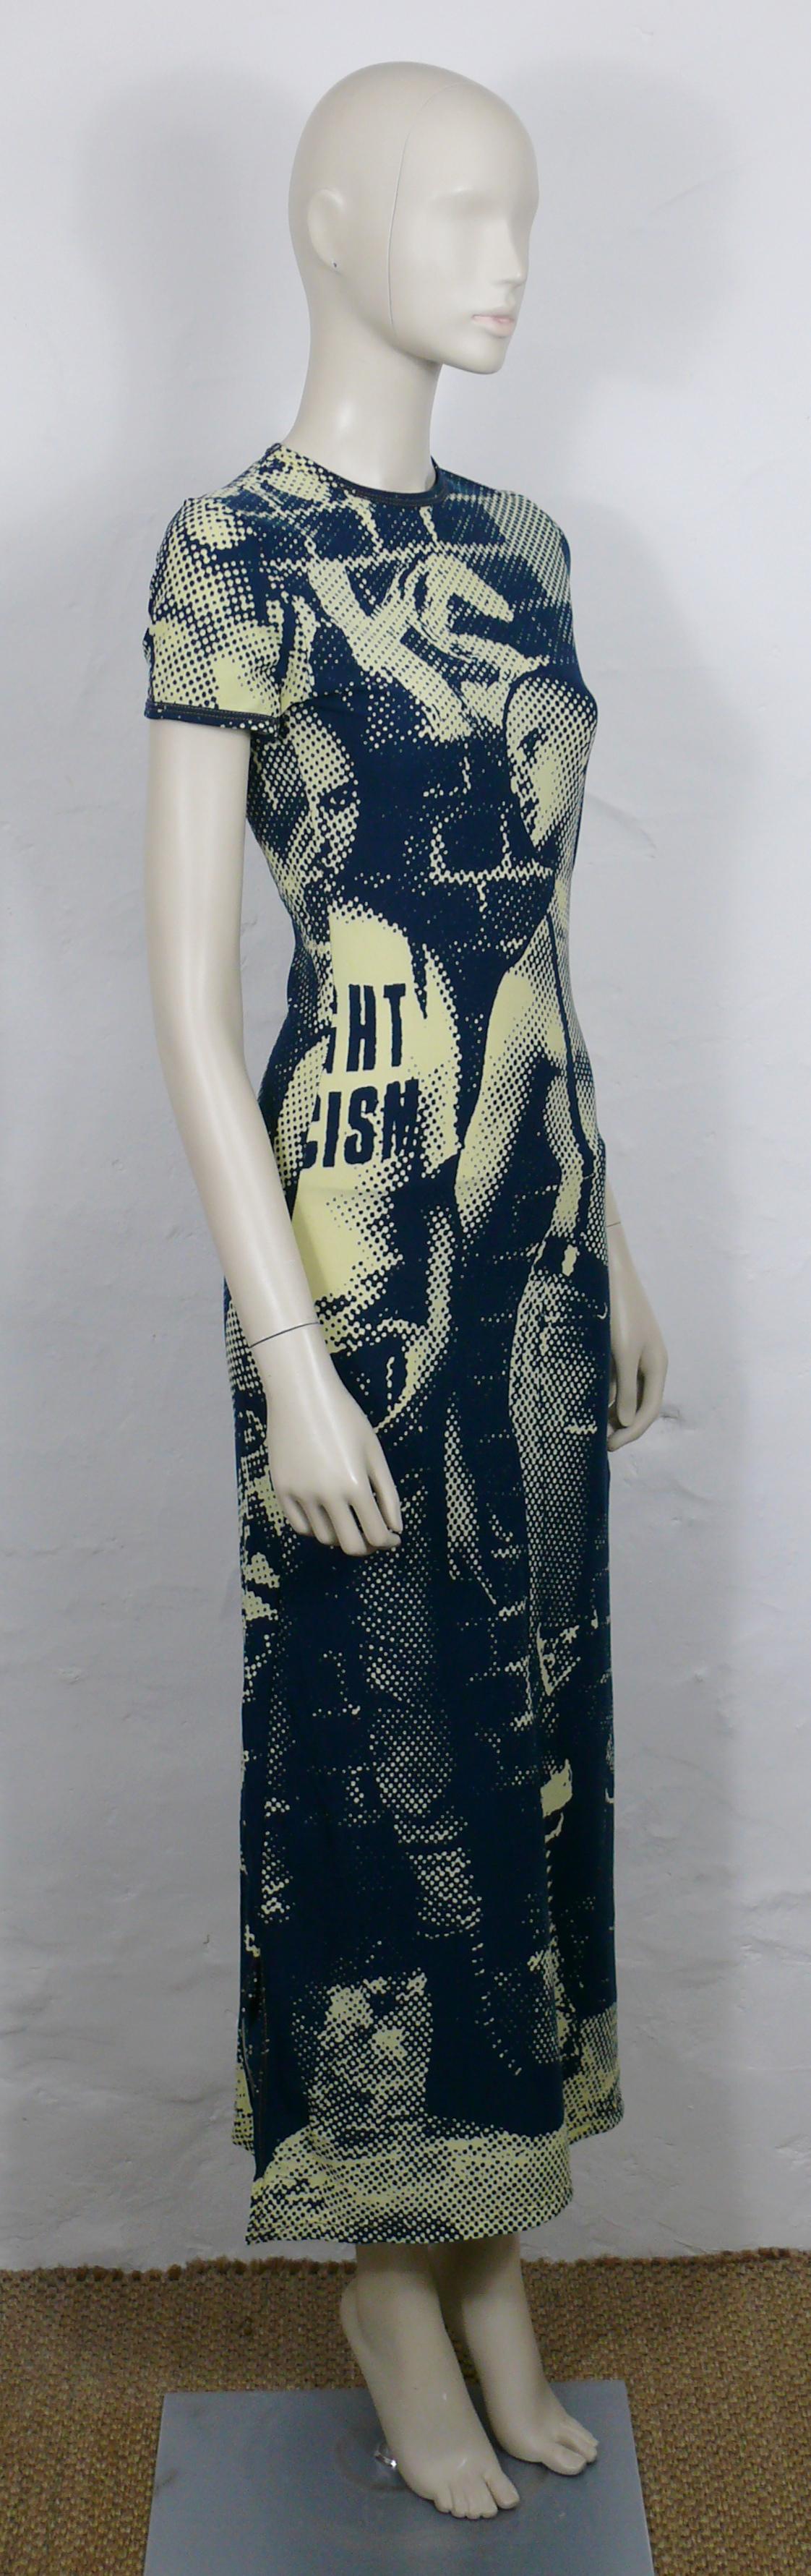 JEAN PAUL GAULTIER JEAN'S vintage FIGHT RACISM blue and yellow bodycon maxi dress.

As seen on KYLIE JENNER.

Slips on.
Has stretch.
A slit on both sides.
No lining.

Label reads GAULTIER JEAN'S Made in France.

Size label reads : unreadable
Please